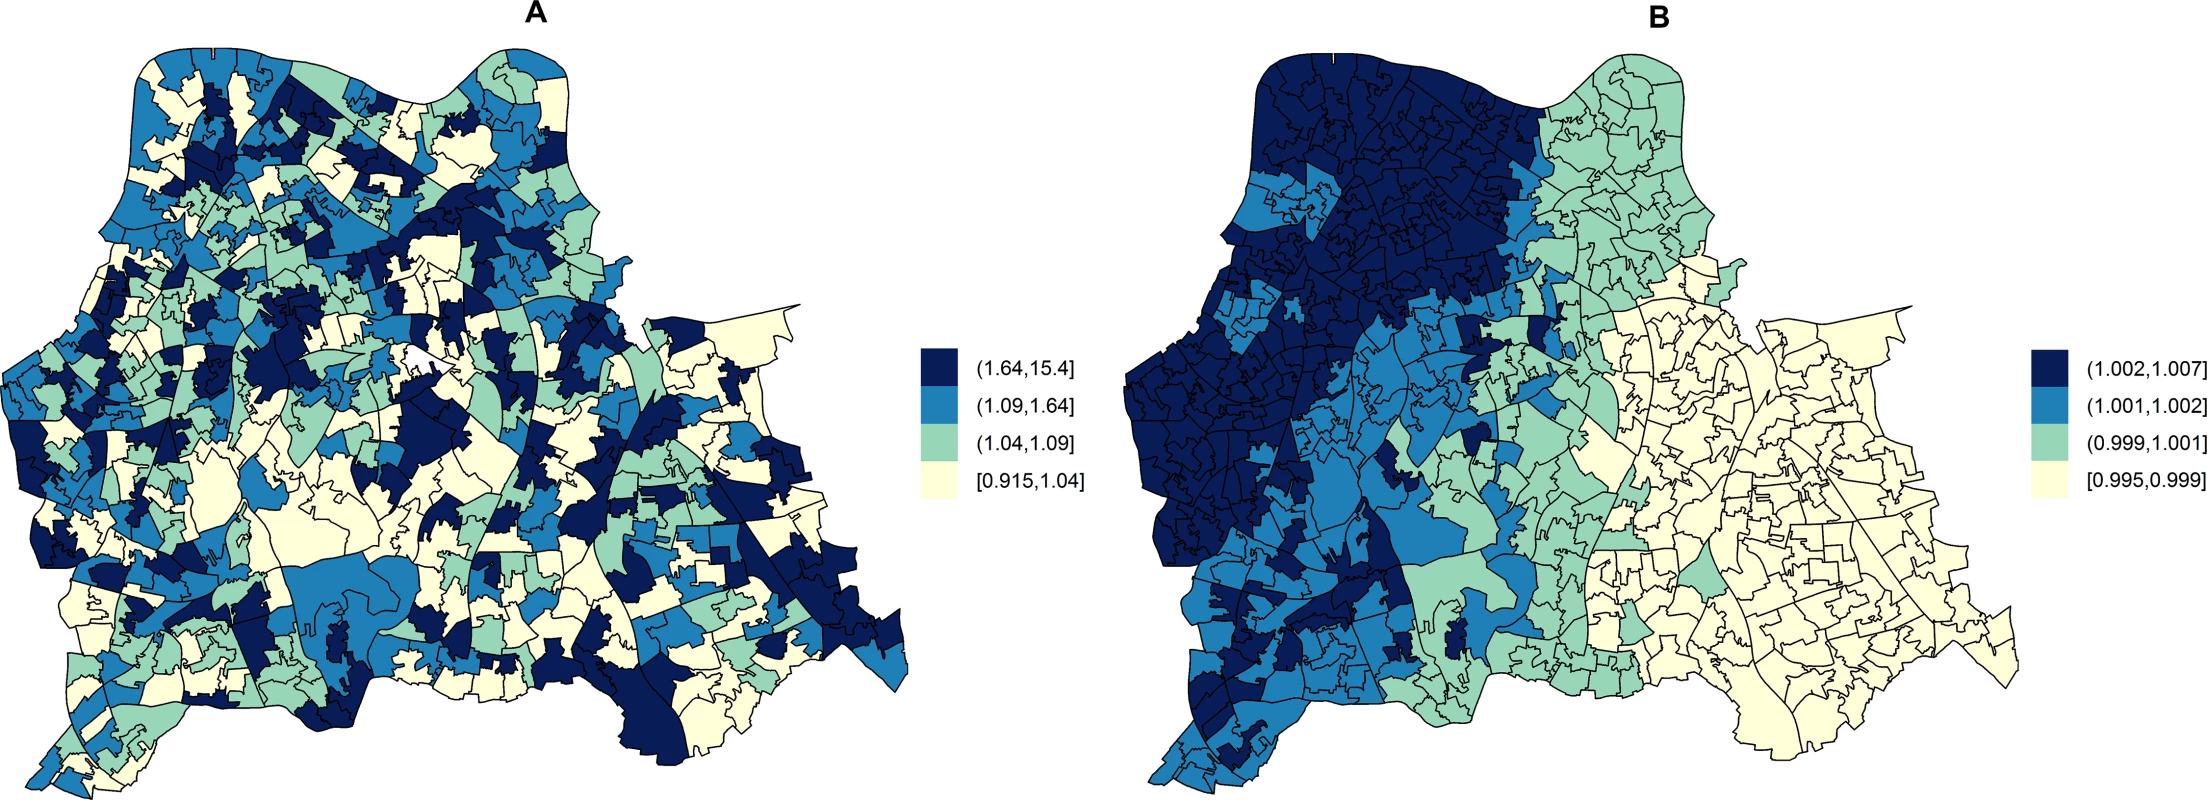 Maps for RR of HA- and CA-MRSA in LSOAs compared to the whole catchment area in disease mapping (unadjusted) models.